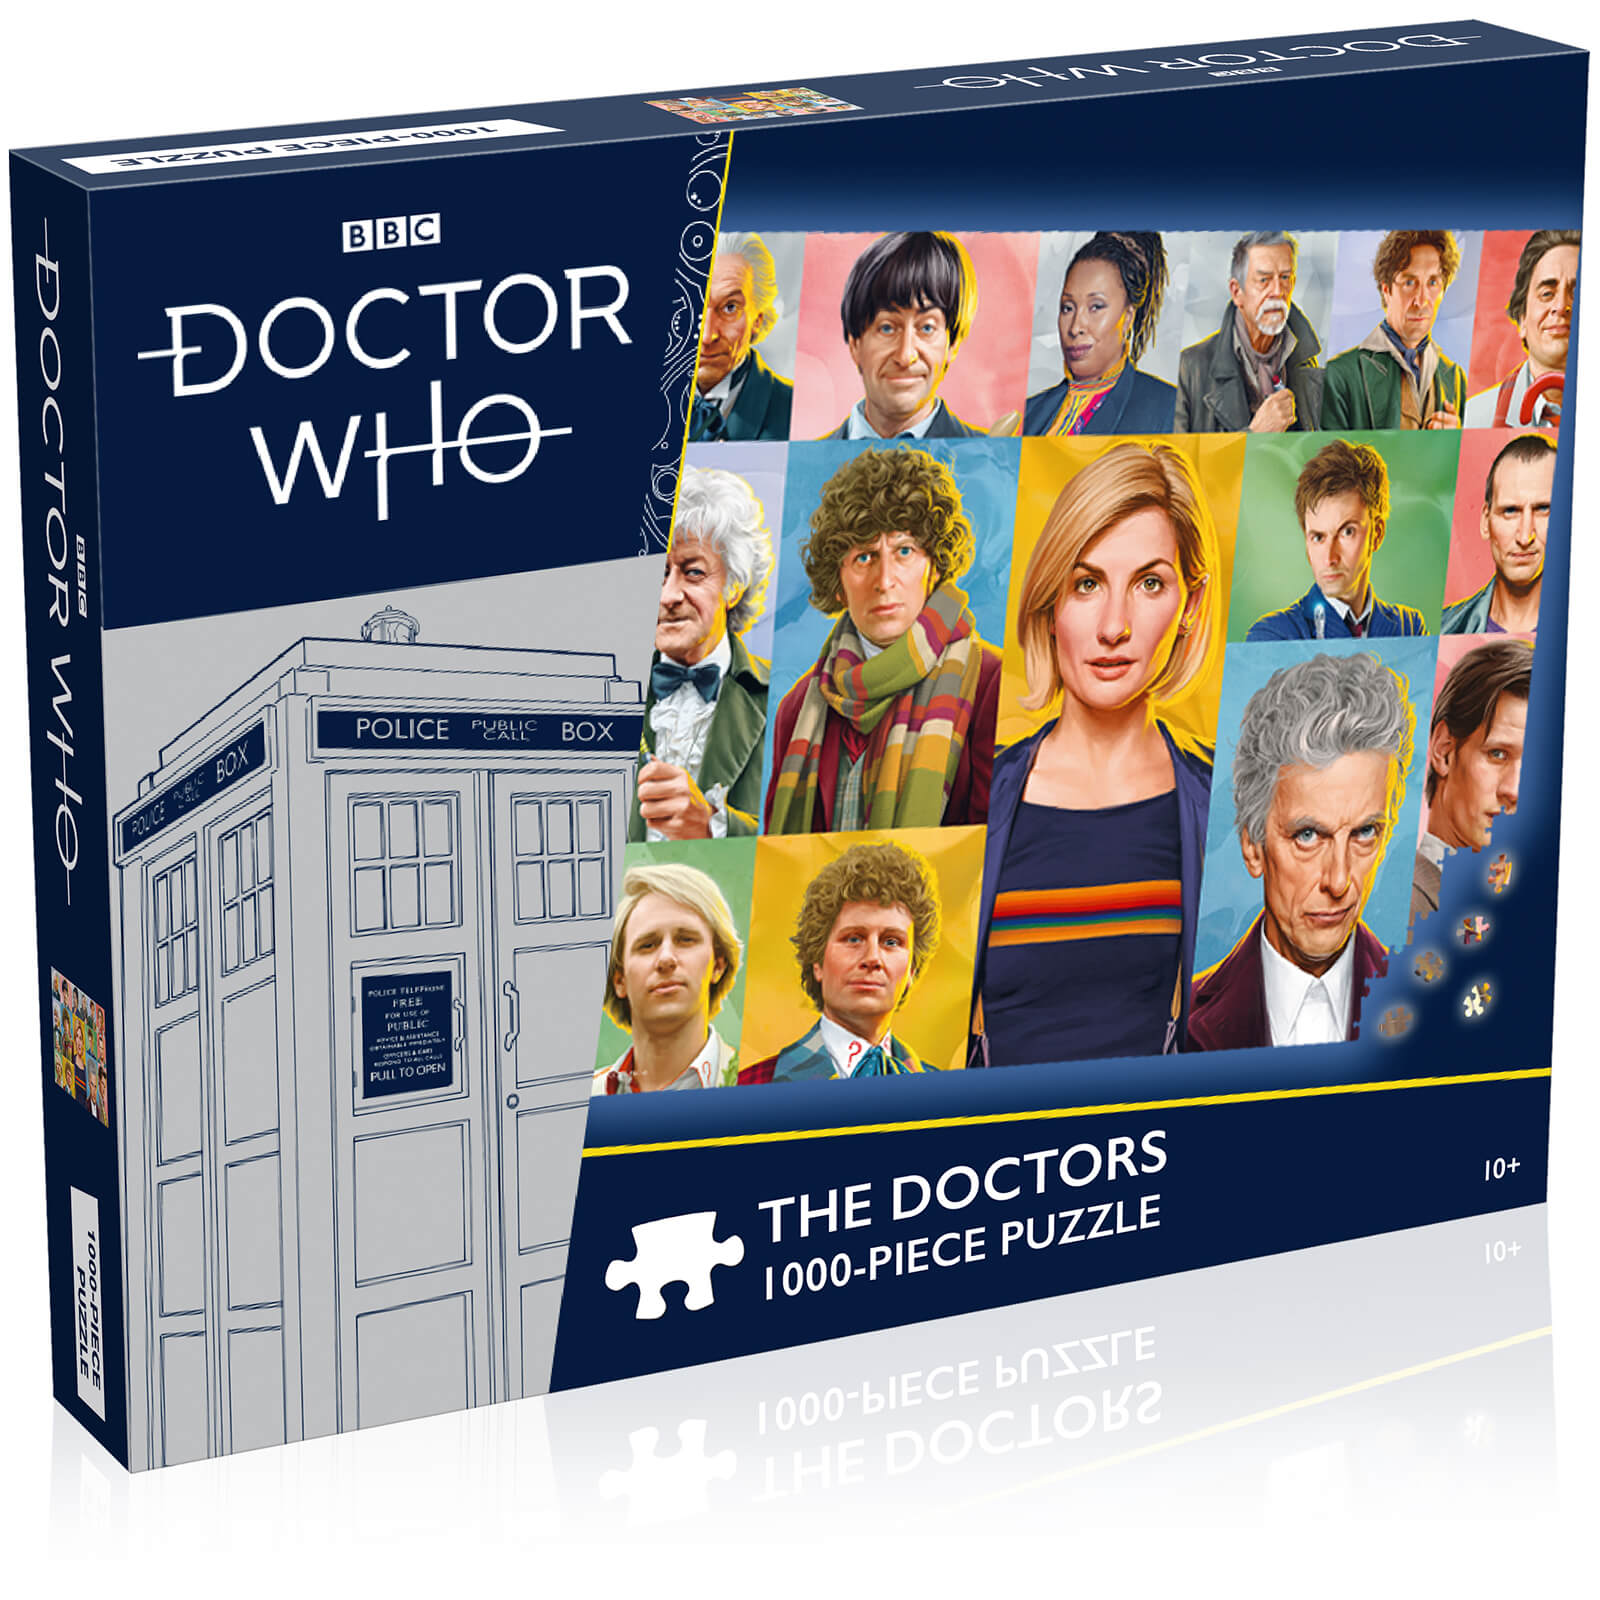 Doctor Who The Doctors 1000 piece Jigsaw Puzzle